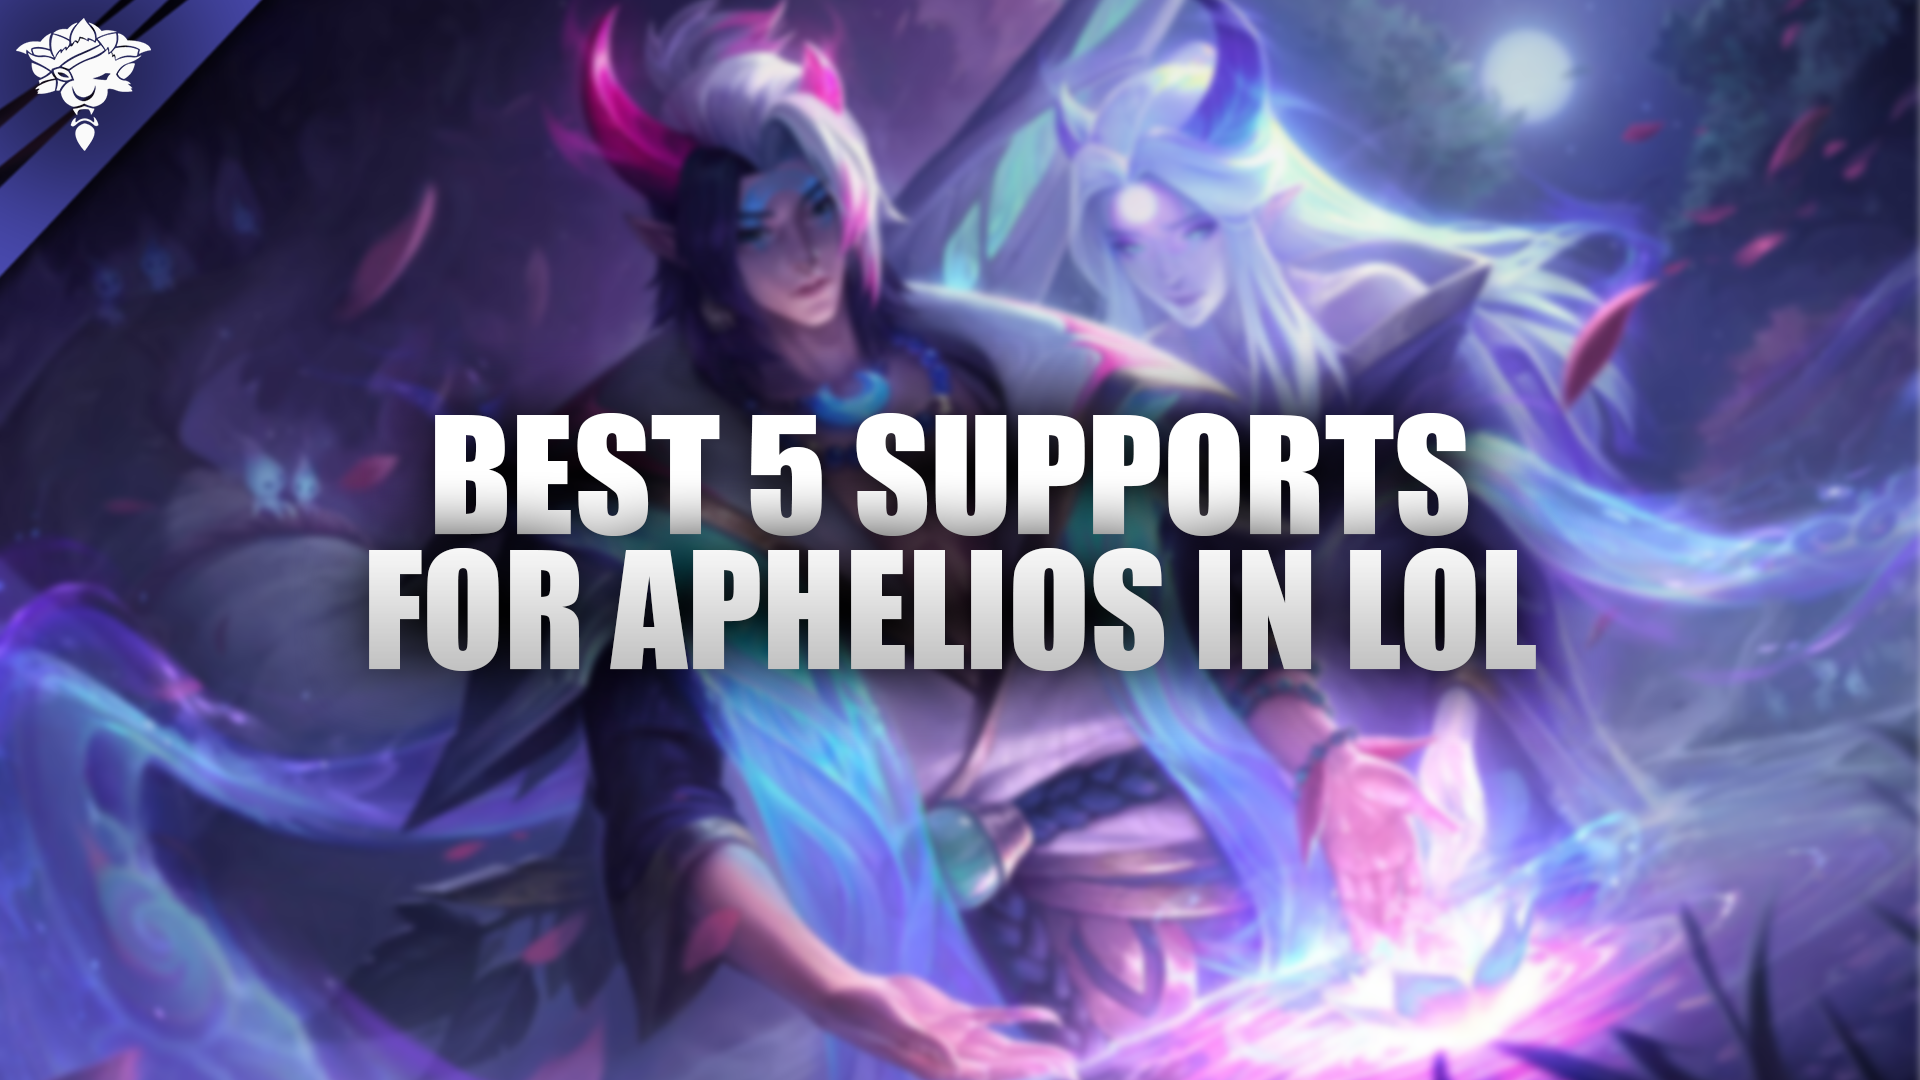 5 Best Supports for Aphelios in League of Legends